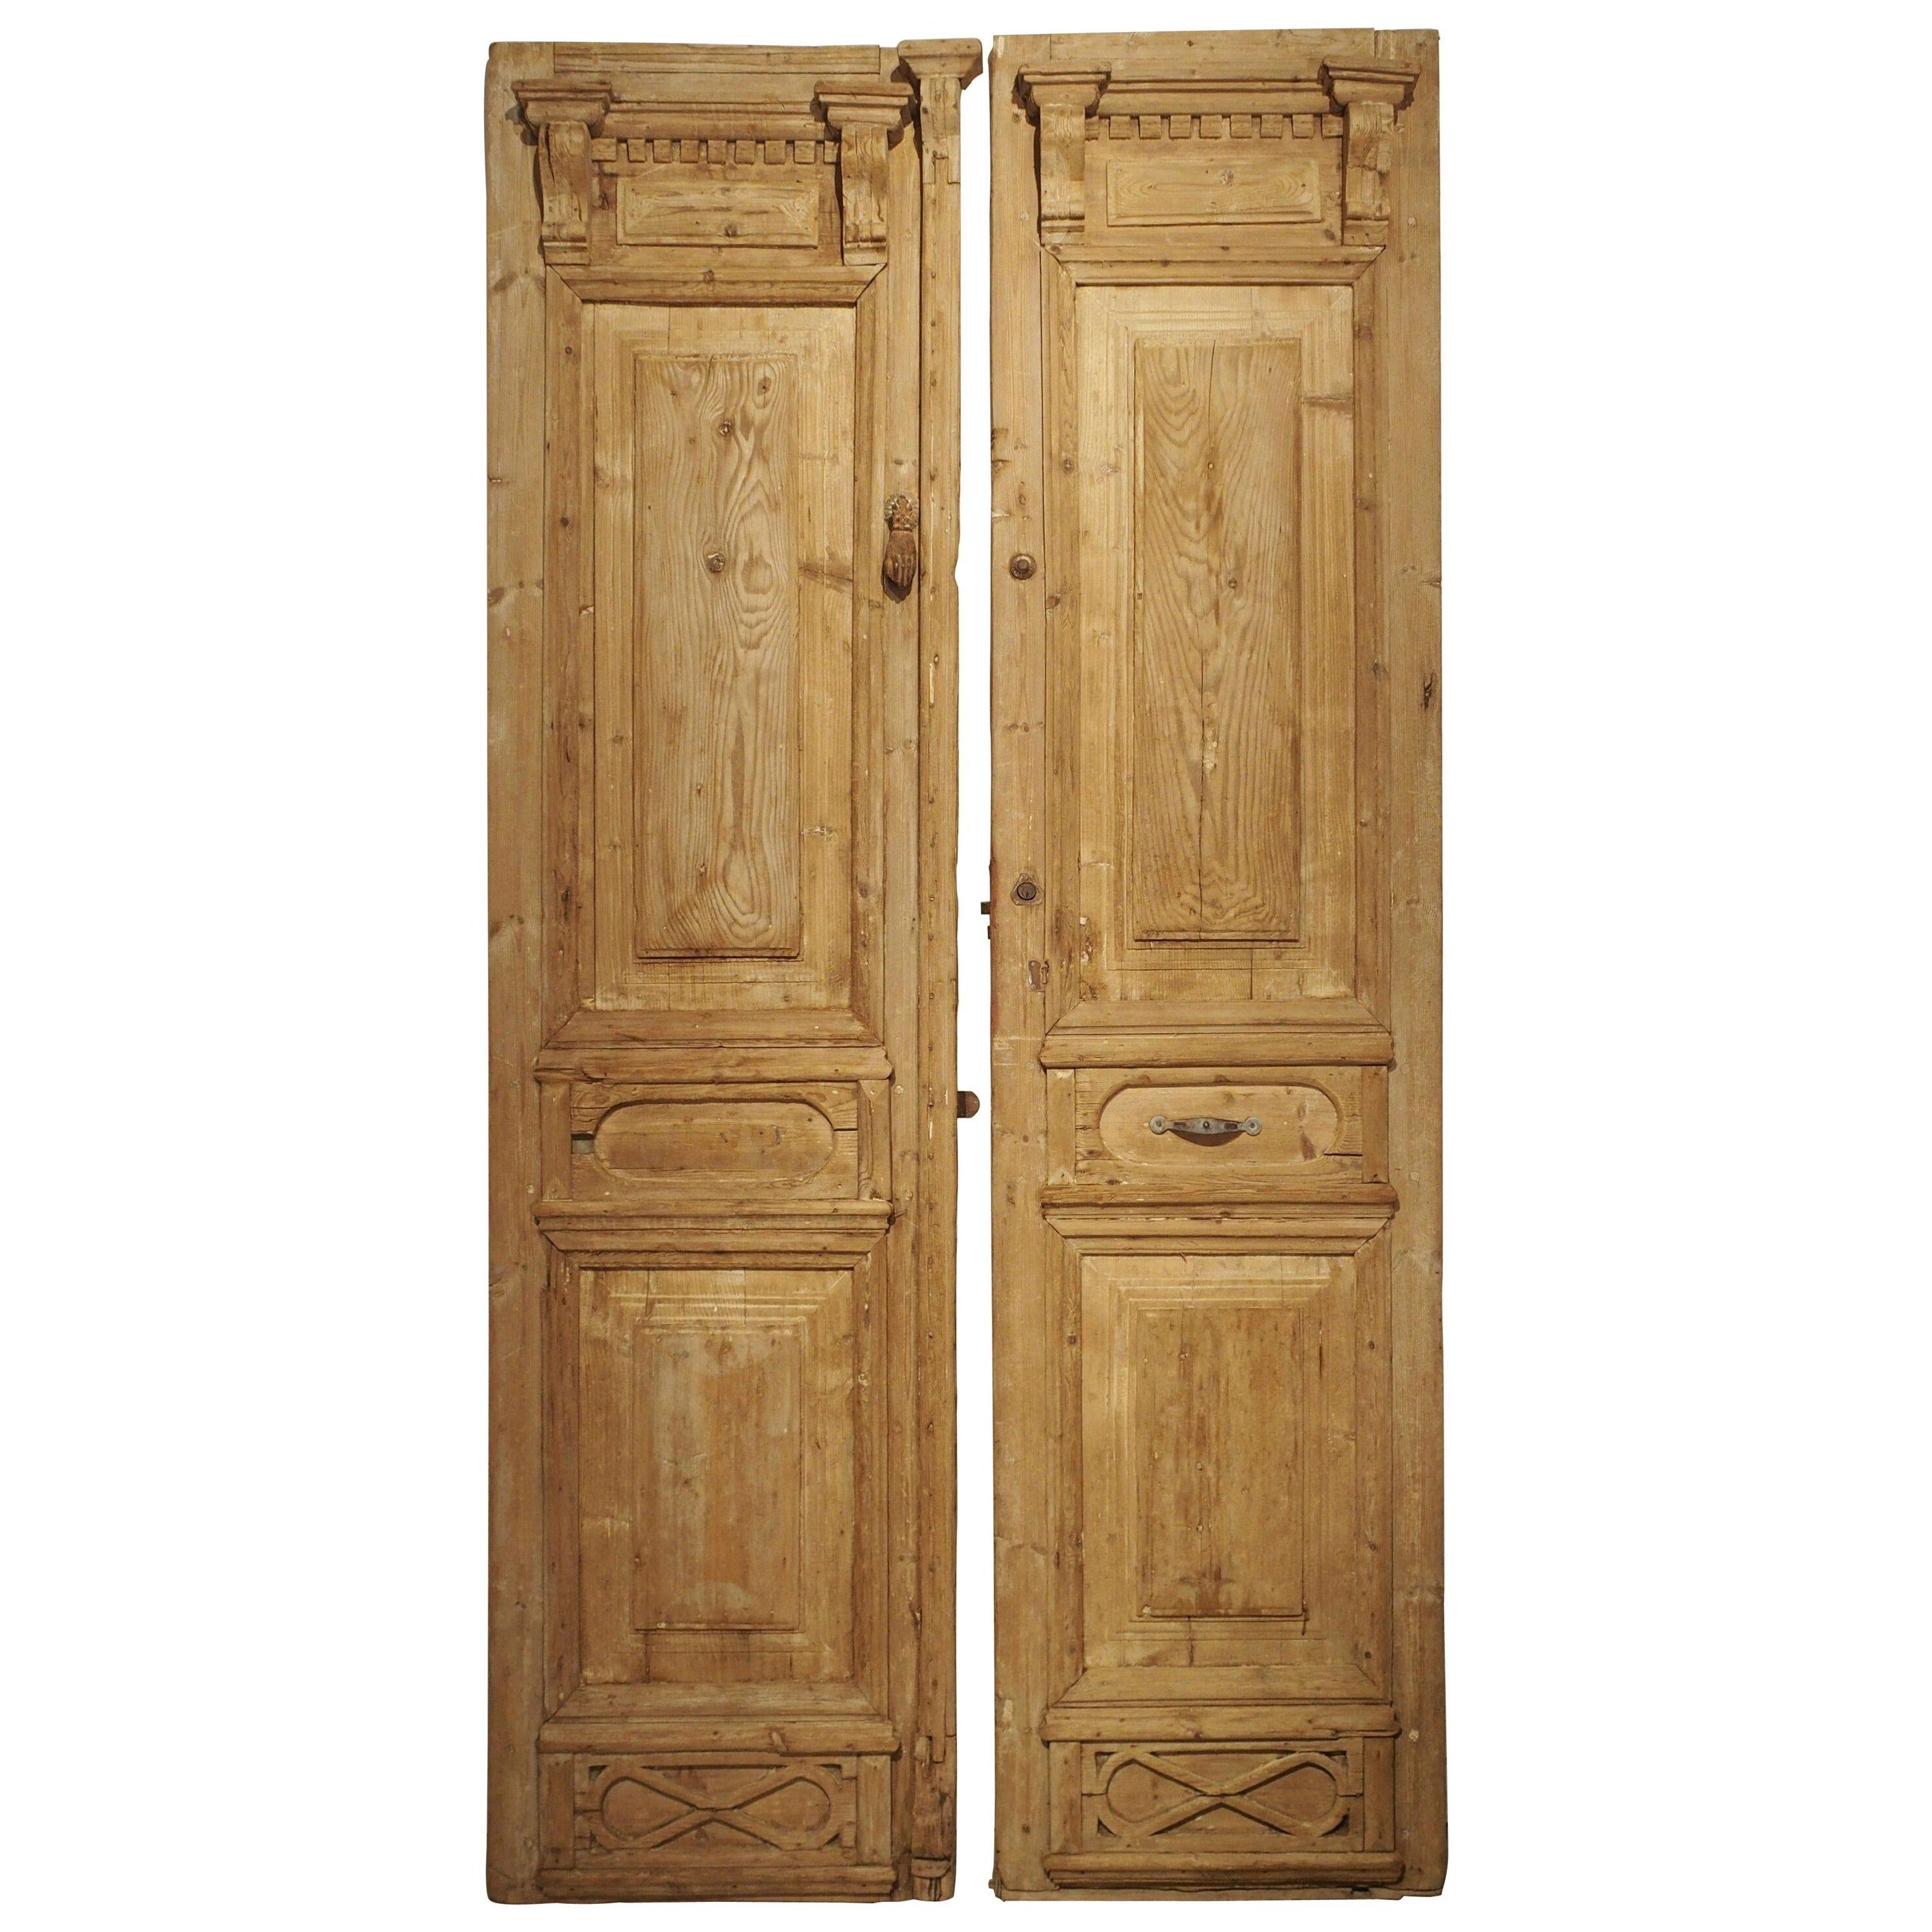 Pair of Antique French Egyptian Doors, Early 1900s